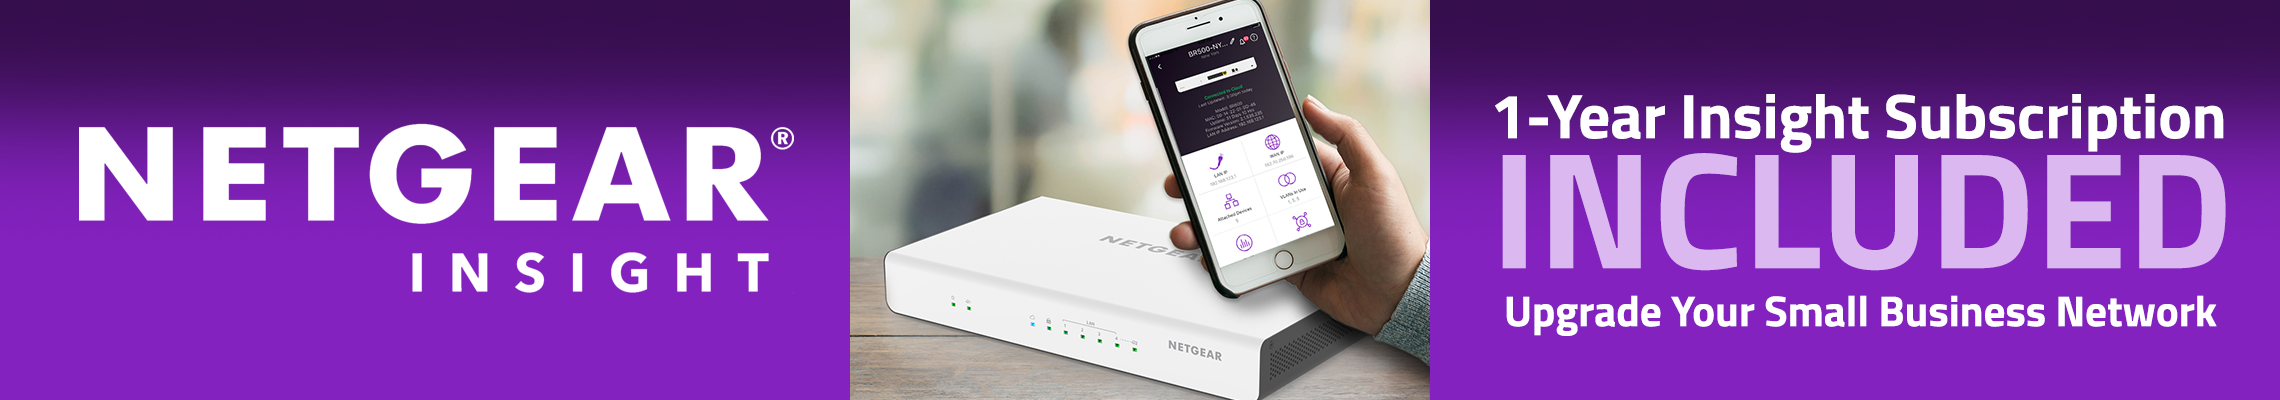 NETGEAR One-Year Insight Subscription Included